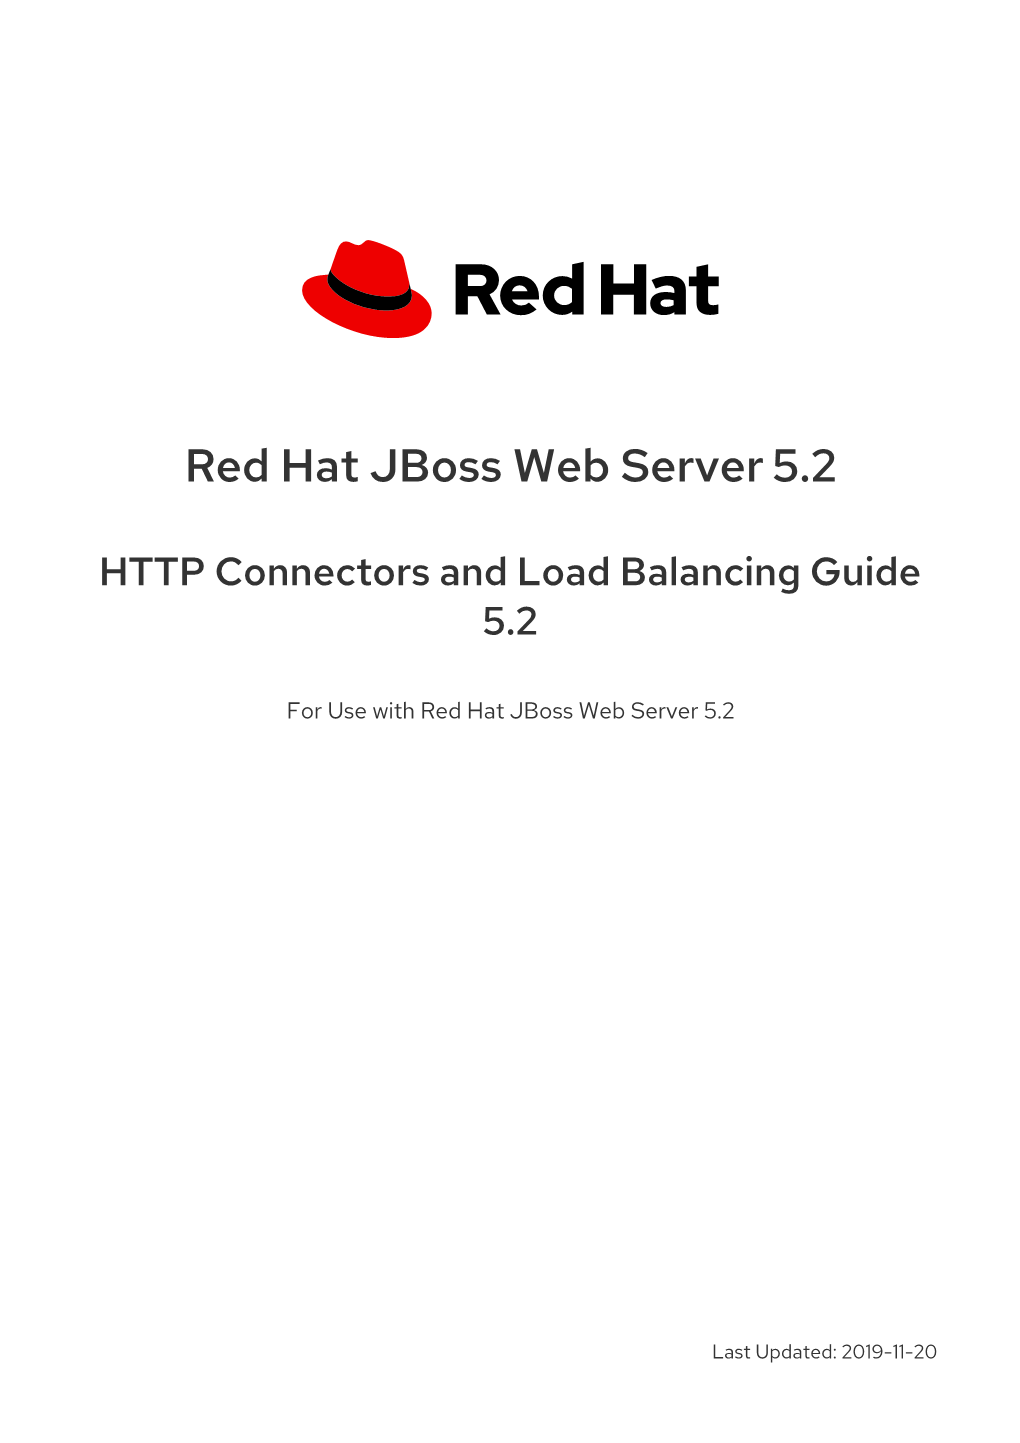 Red Hat Jboss Web Server 5.2 HTTP Connectors and Load Balancing Guide 5.2